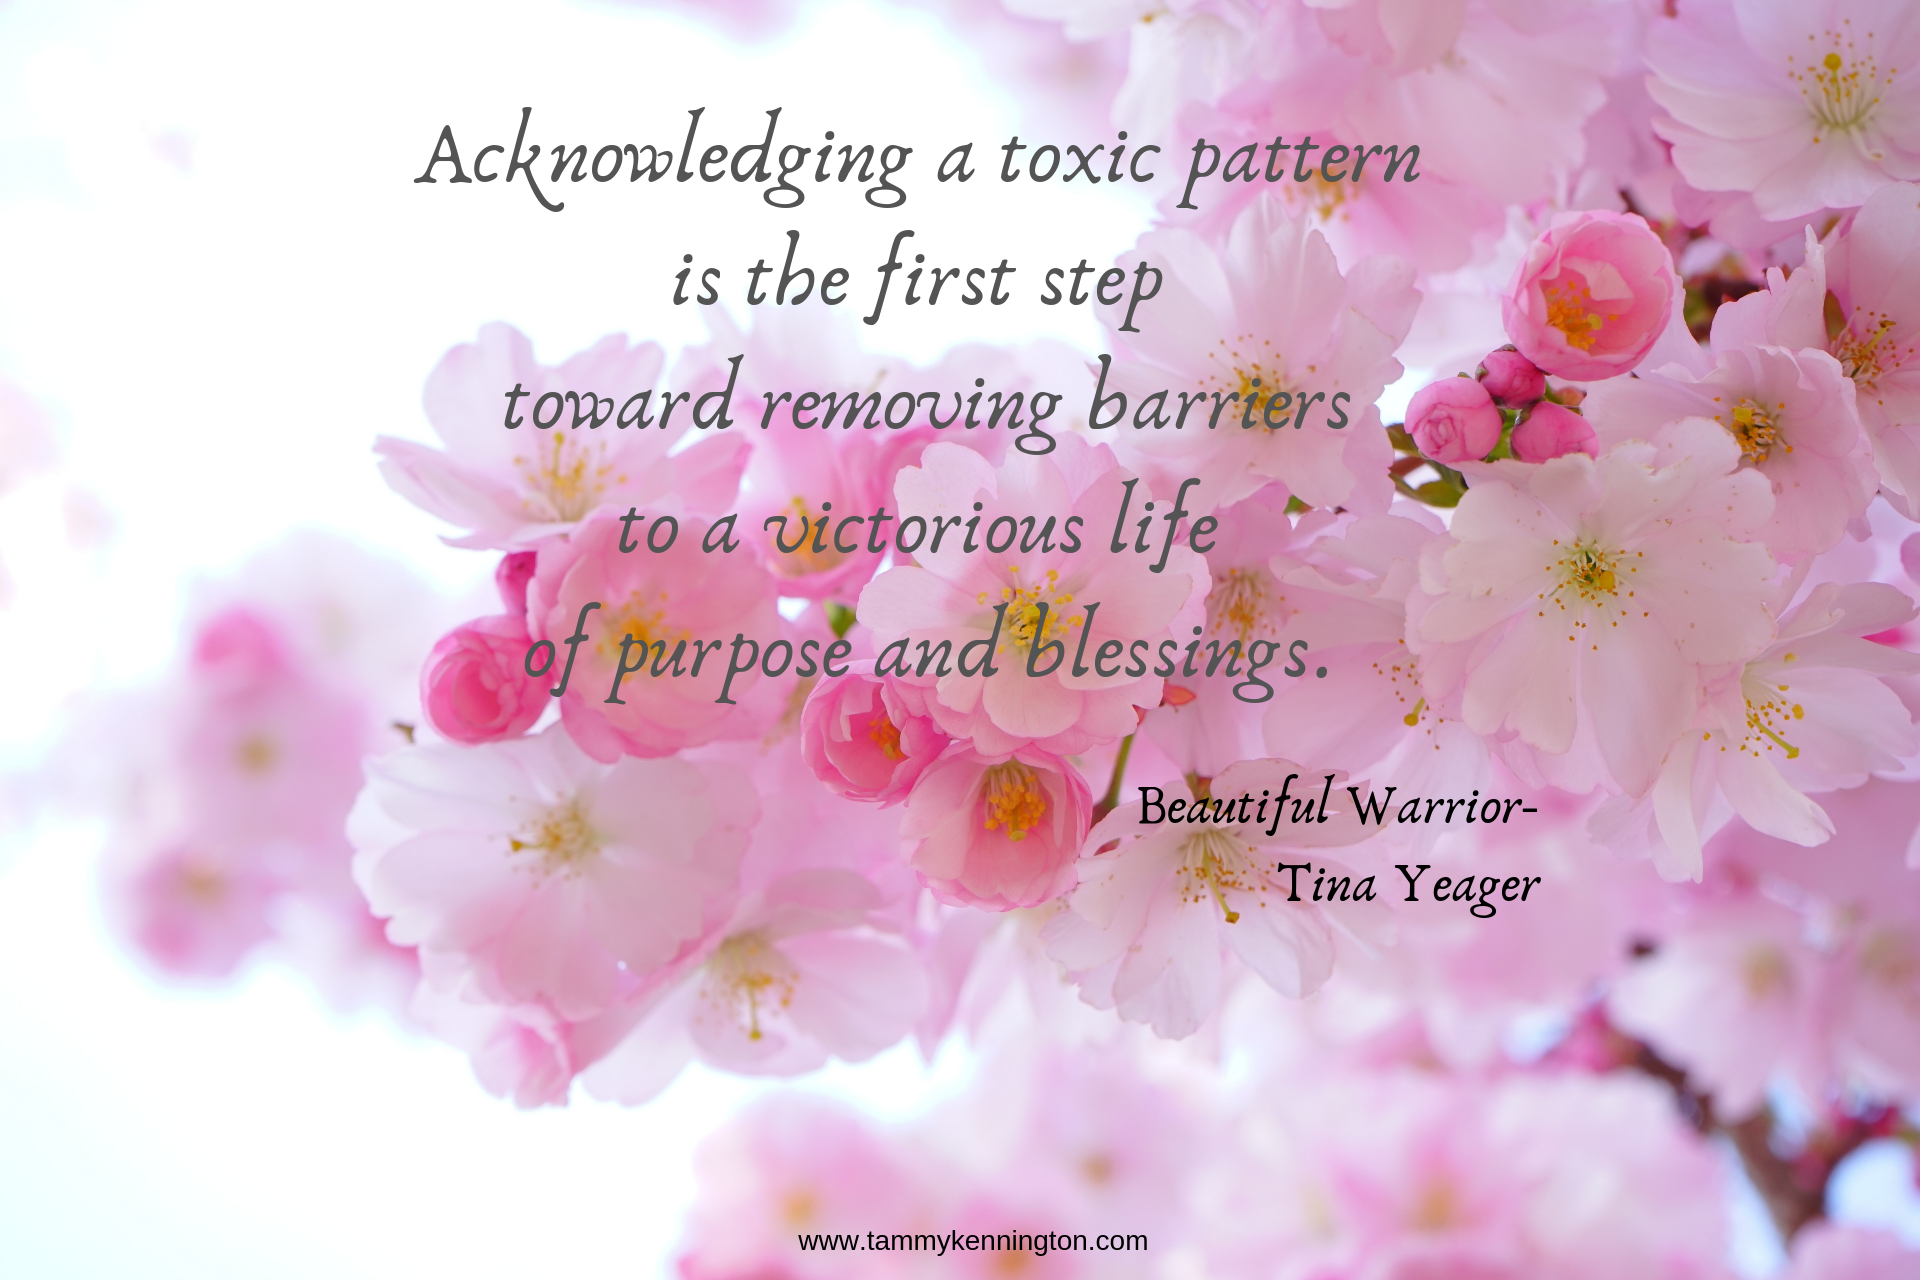 Acknowledging a toxic pattern is the first step toward removing barriers to a victorious life of purpose and blessings